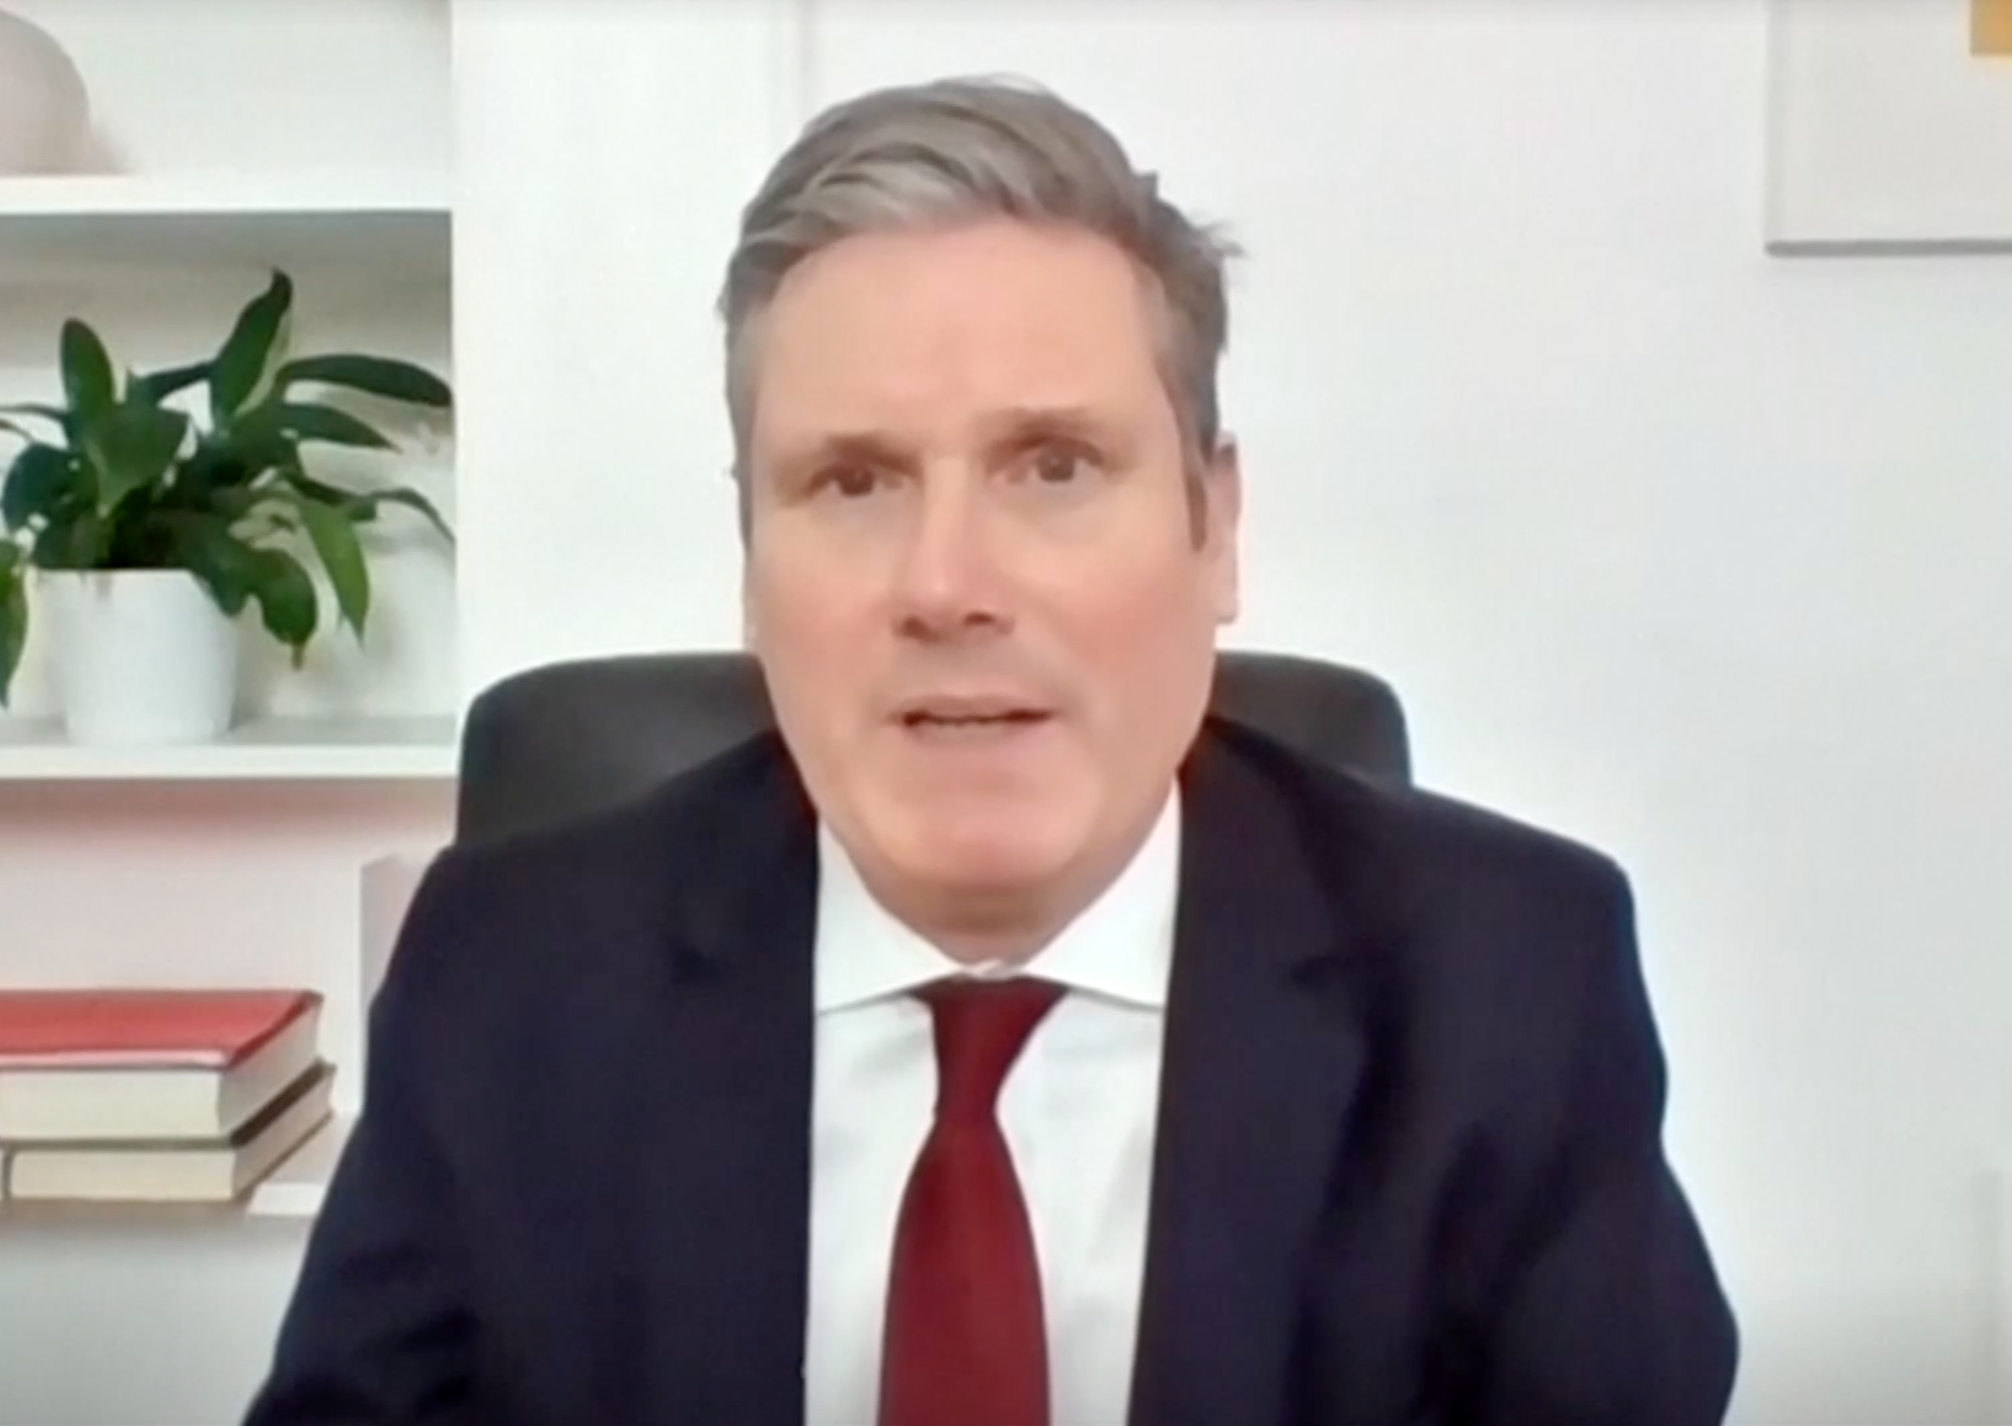 Keir Starmer, who usually looks worried, takes part in Prime Minister’s Questions by video